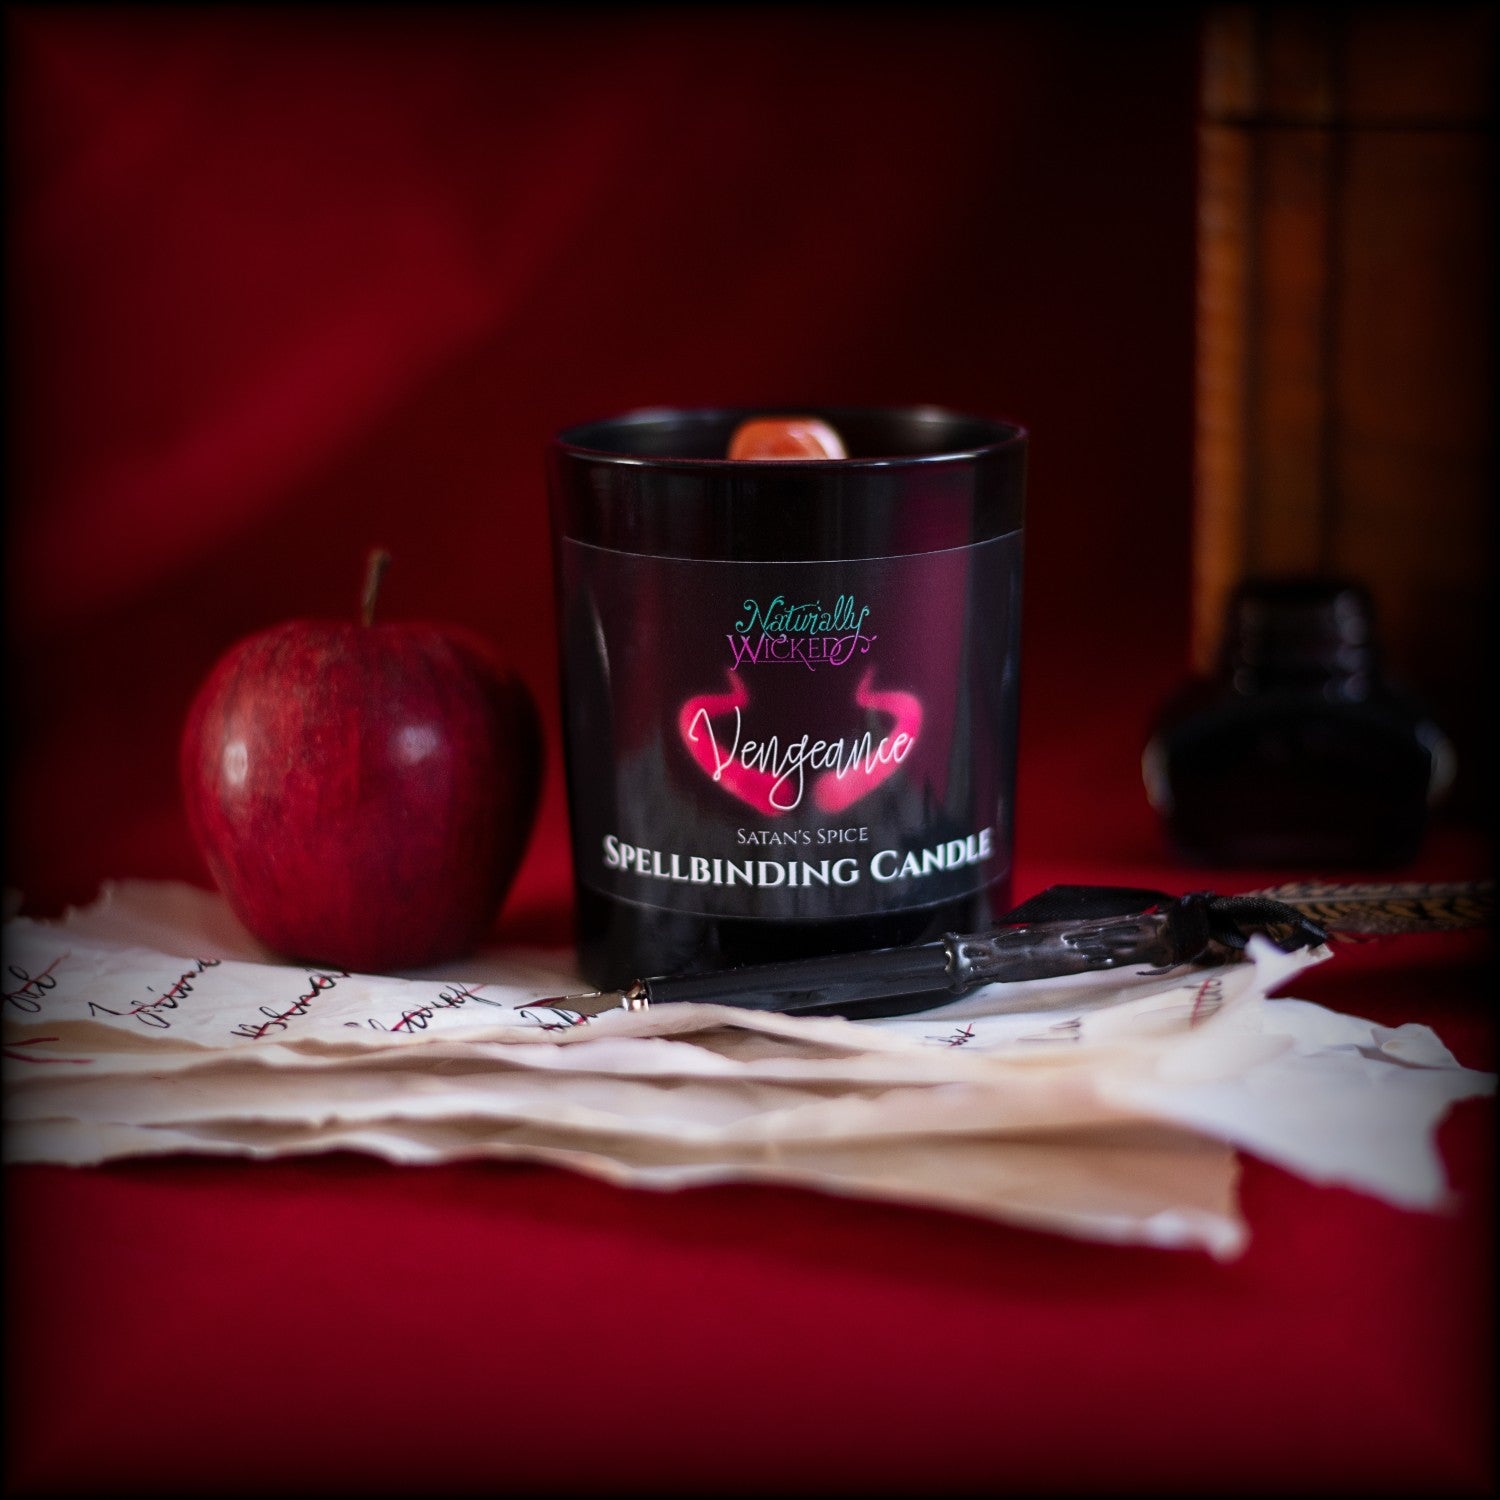 A Gift Of Sweet Revenge. A Scenic View Of The Perfect Spell Candle. Naturally Wicked Spellbinding Vengeance Candle Proudly Presents It's Dark Black Gloss Label With A Pair Of Red Glowing Devil Horns On The Front. The Candle Features Plant-based Smooth Rich Red Wax, A Wood Wick And A Beautiful Carnelian Crystal. A Unique Gift For Dark Souls And Twisted Desires